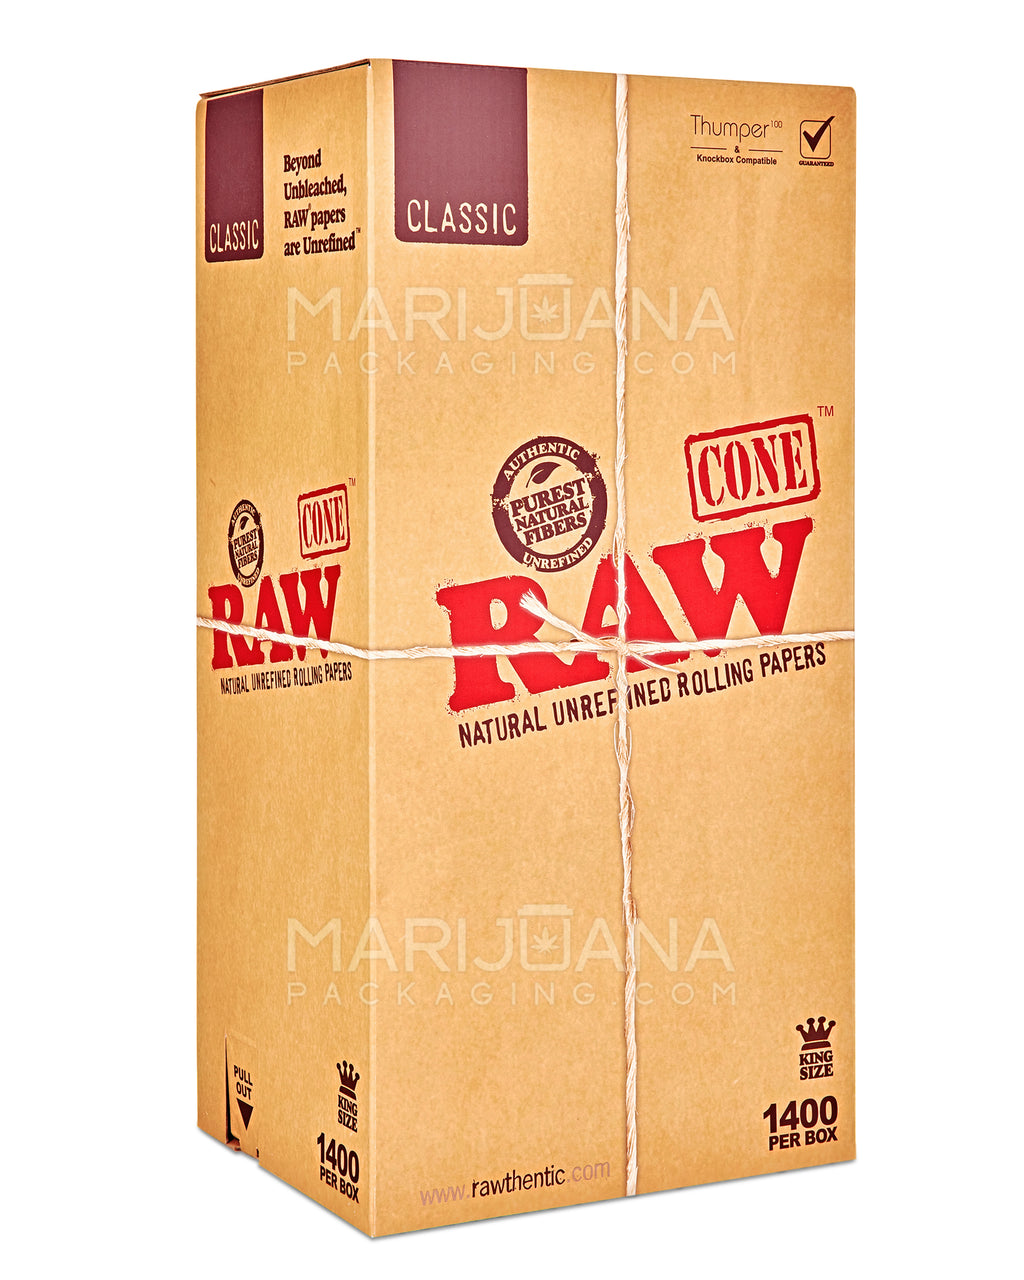 RAW classic king size pre rolled cone with tip 200 pack 